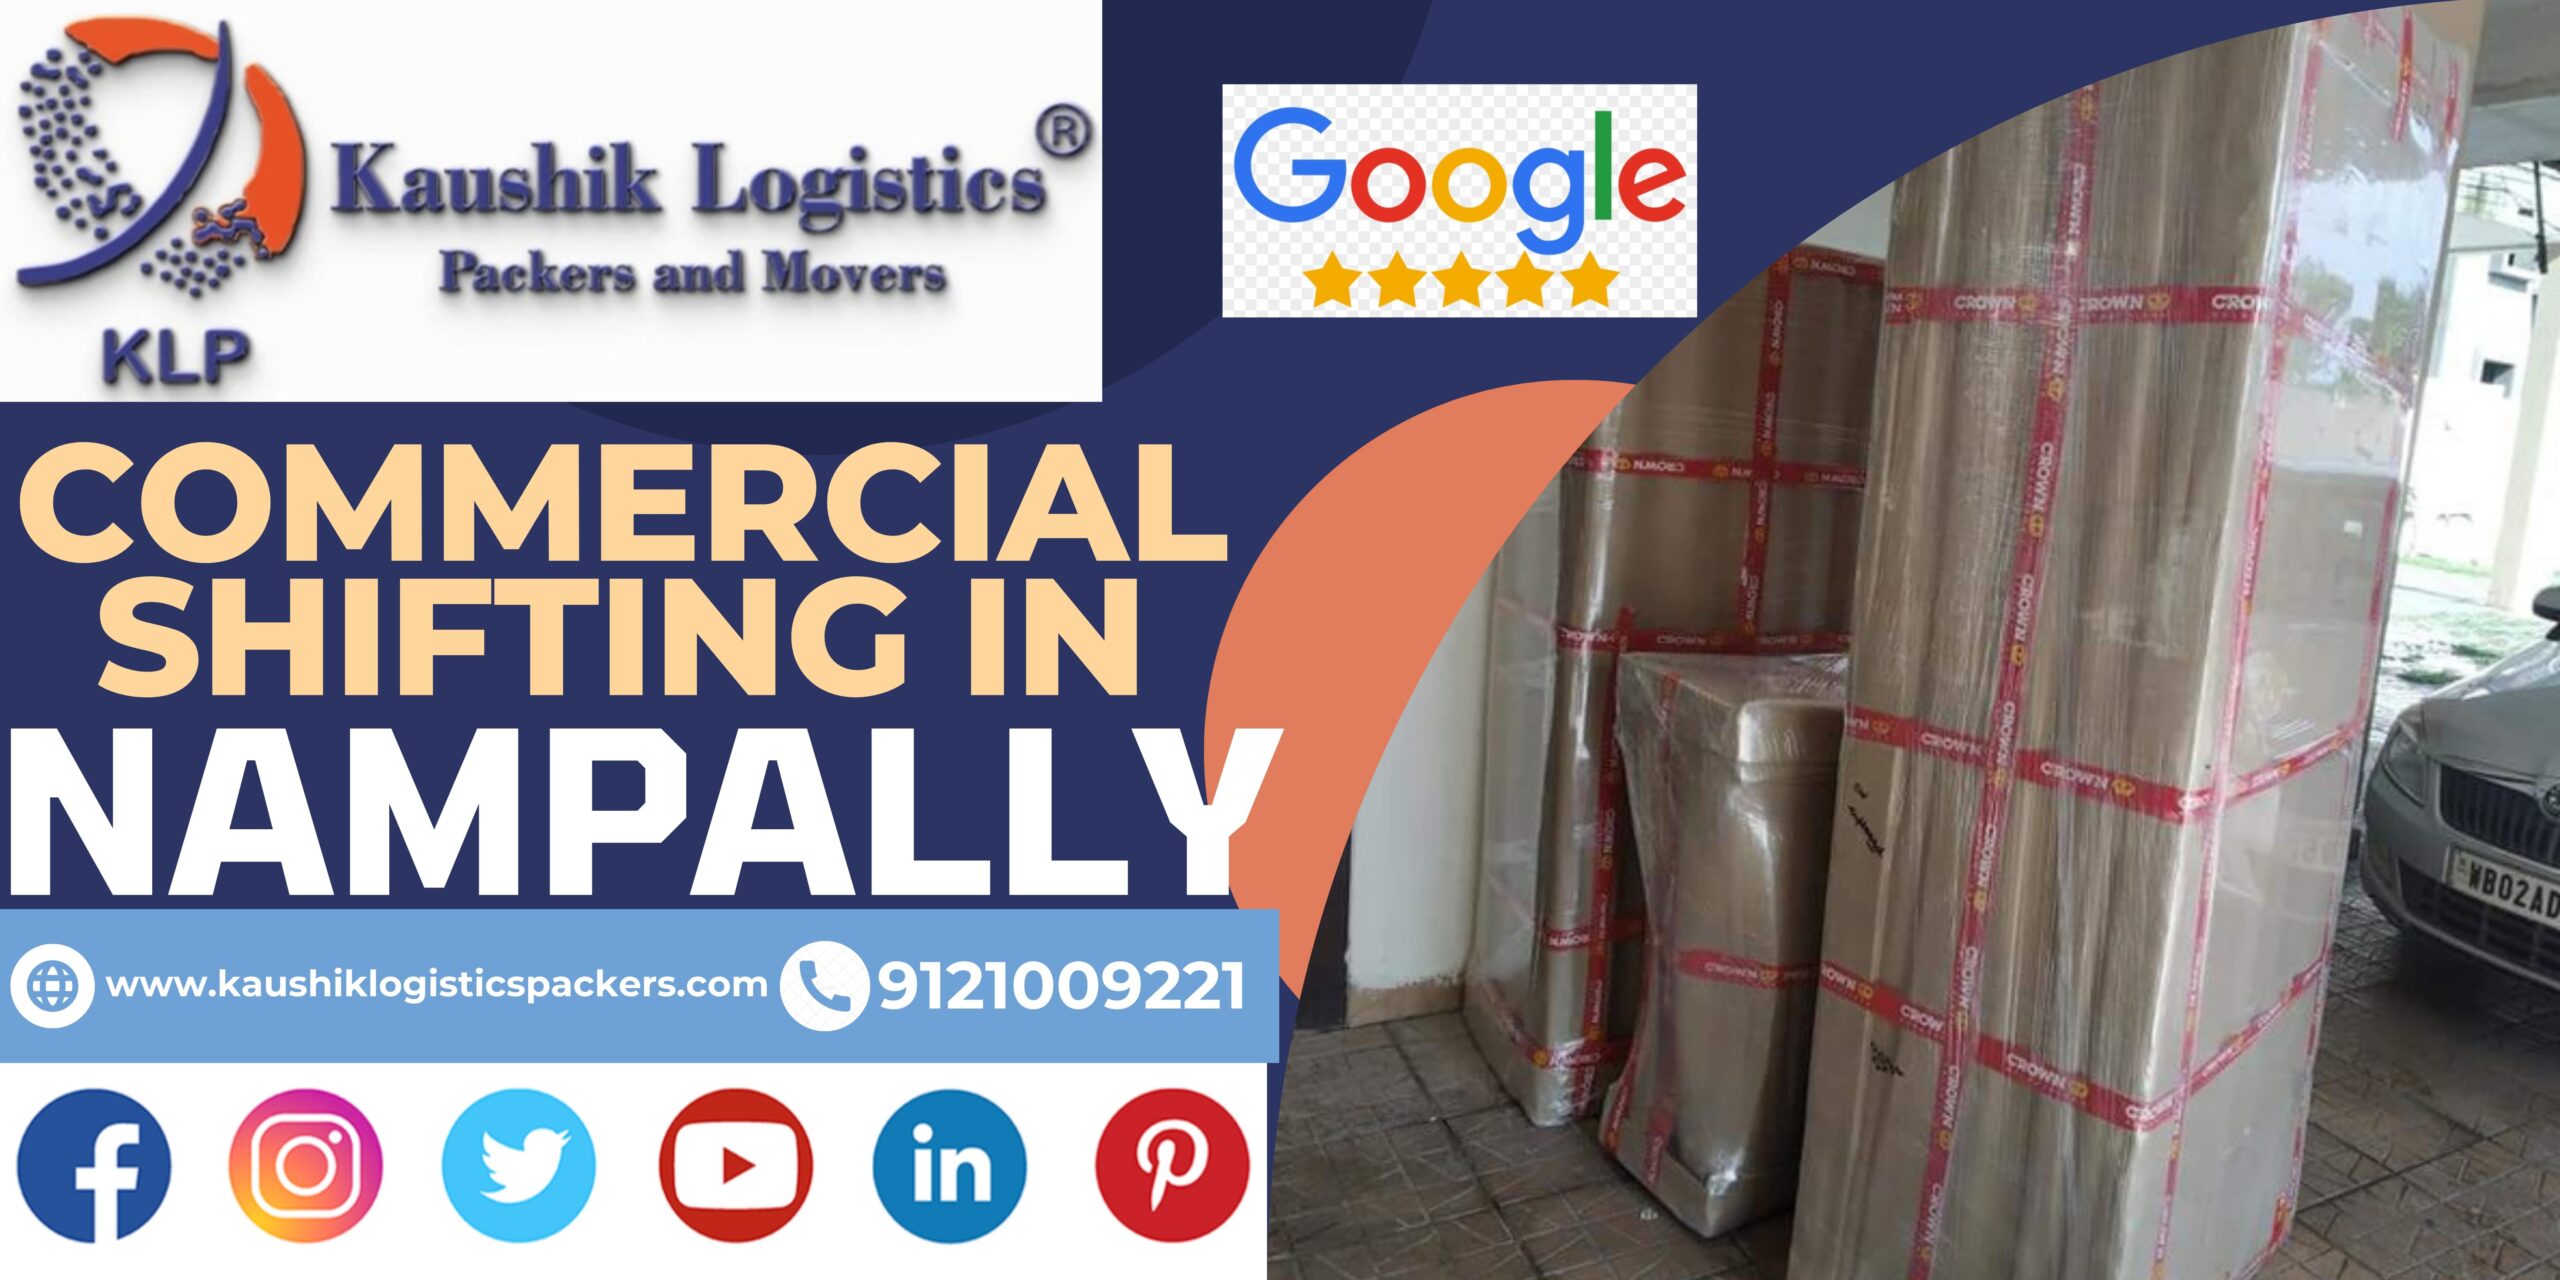 Packers and Movers In Nampally